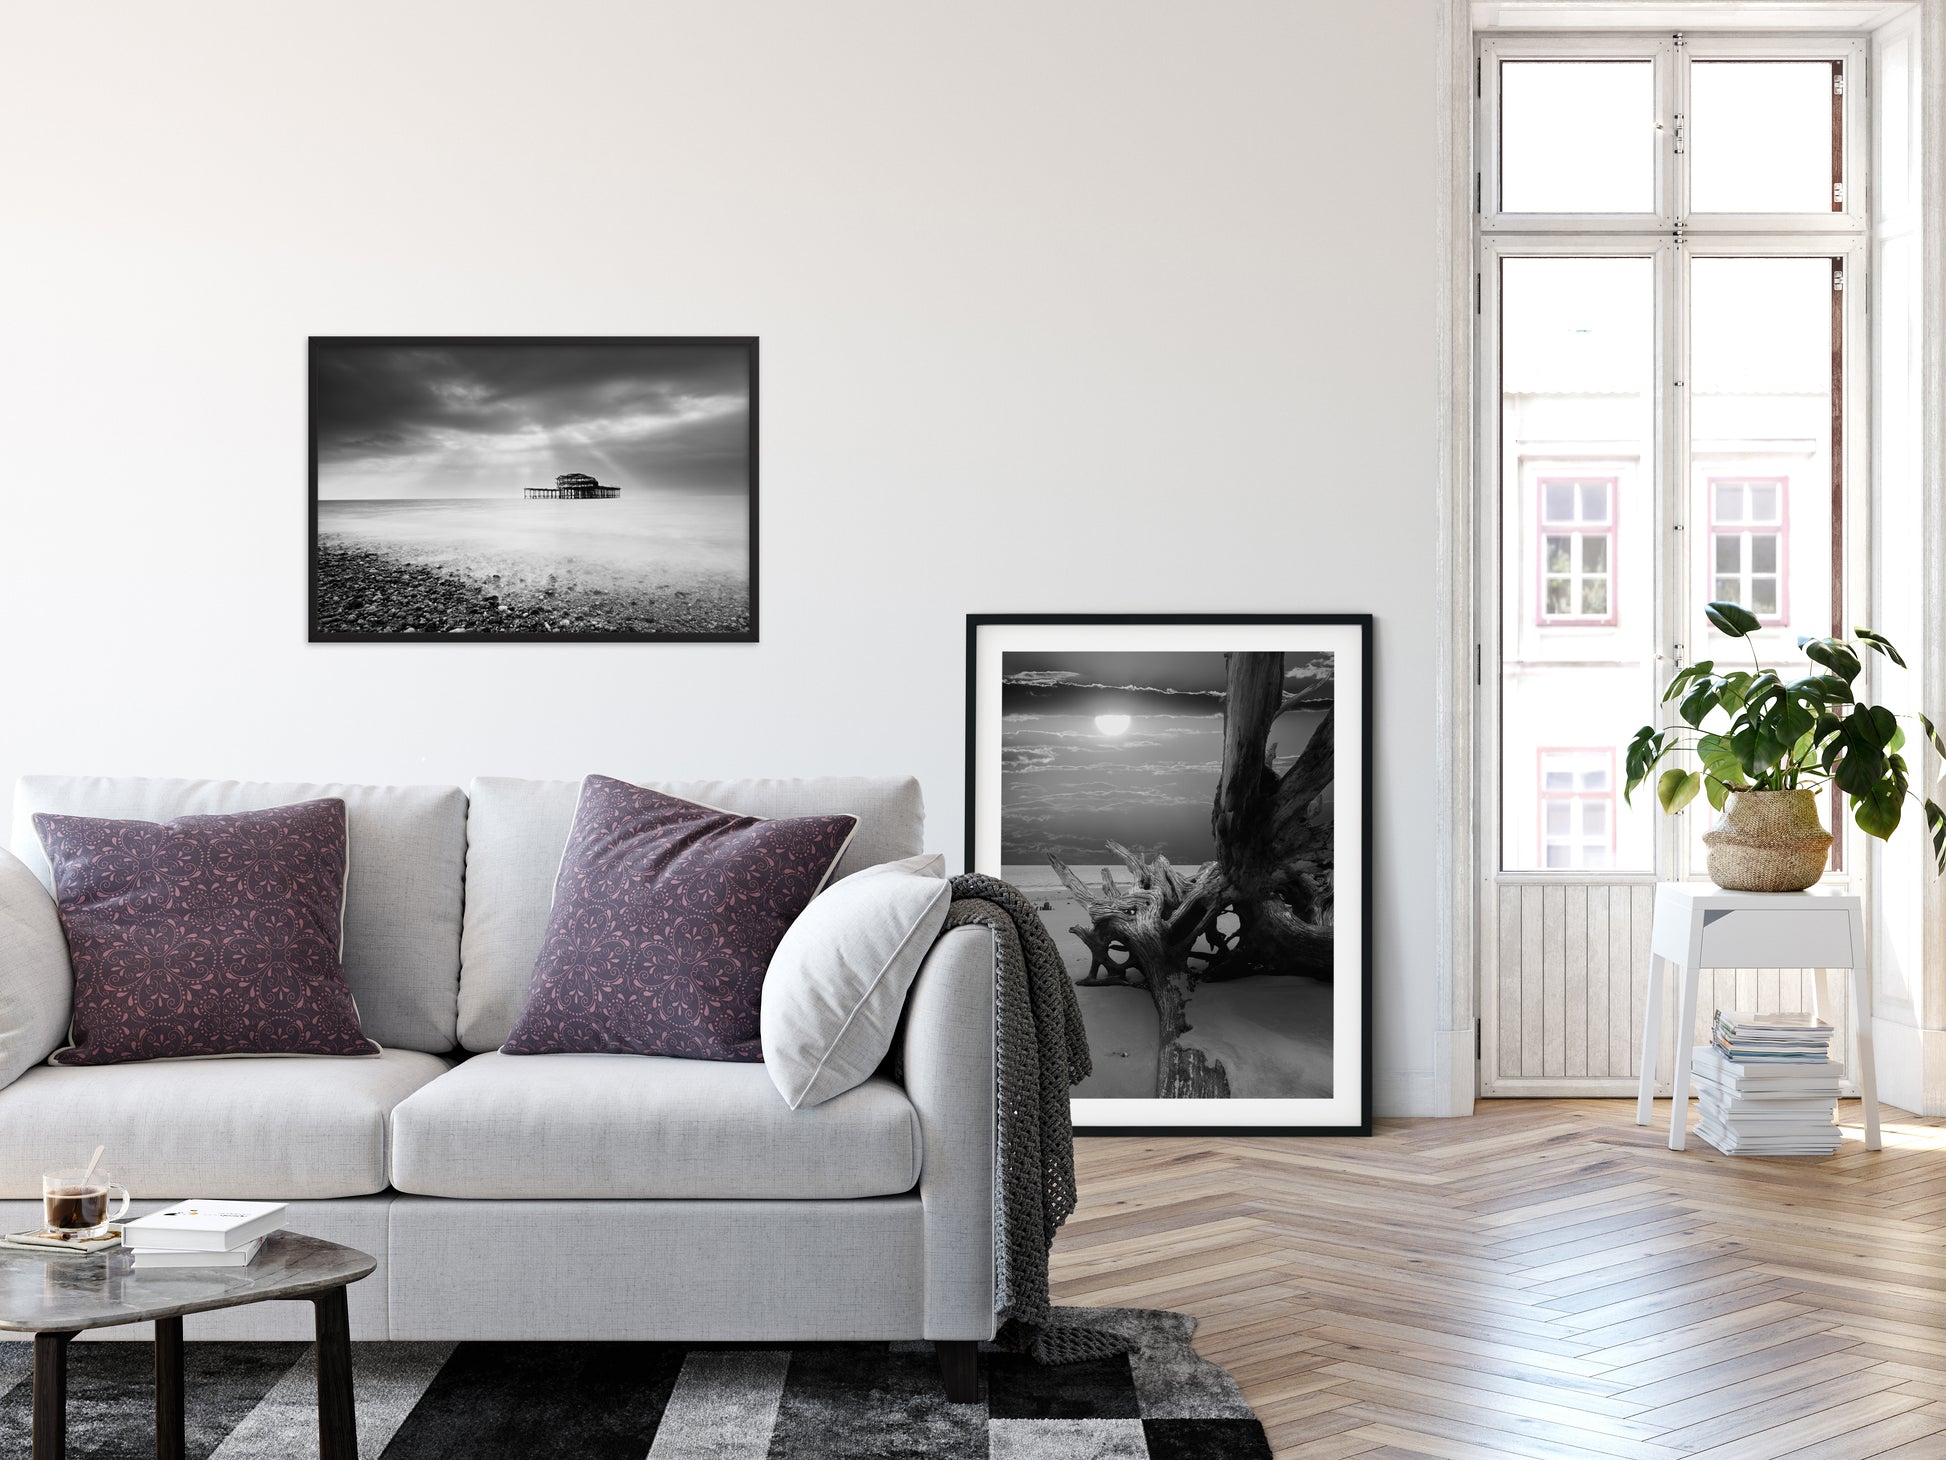 Living Room Wall Decor Above Couch: Abandoned West Pier Coastal Seascape Landscape Black and White Photograph Framed Wall Art Print